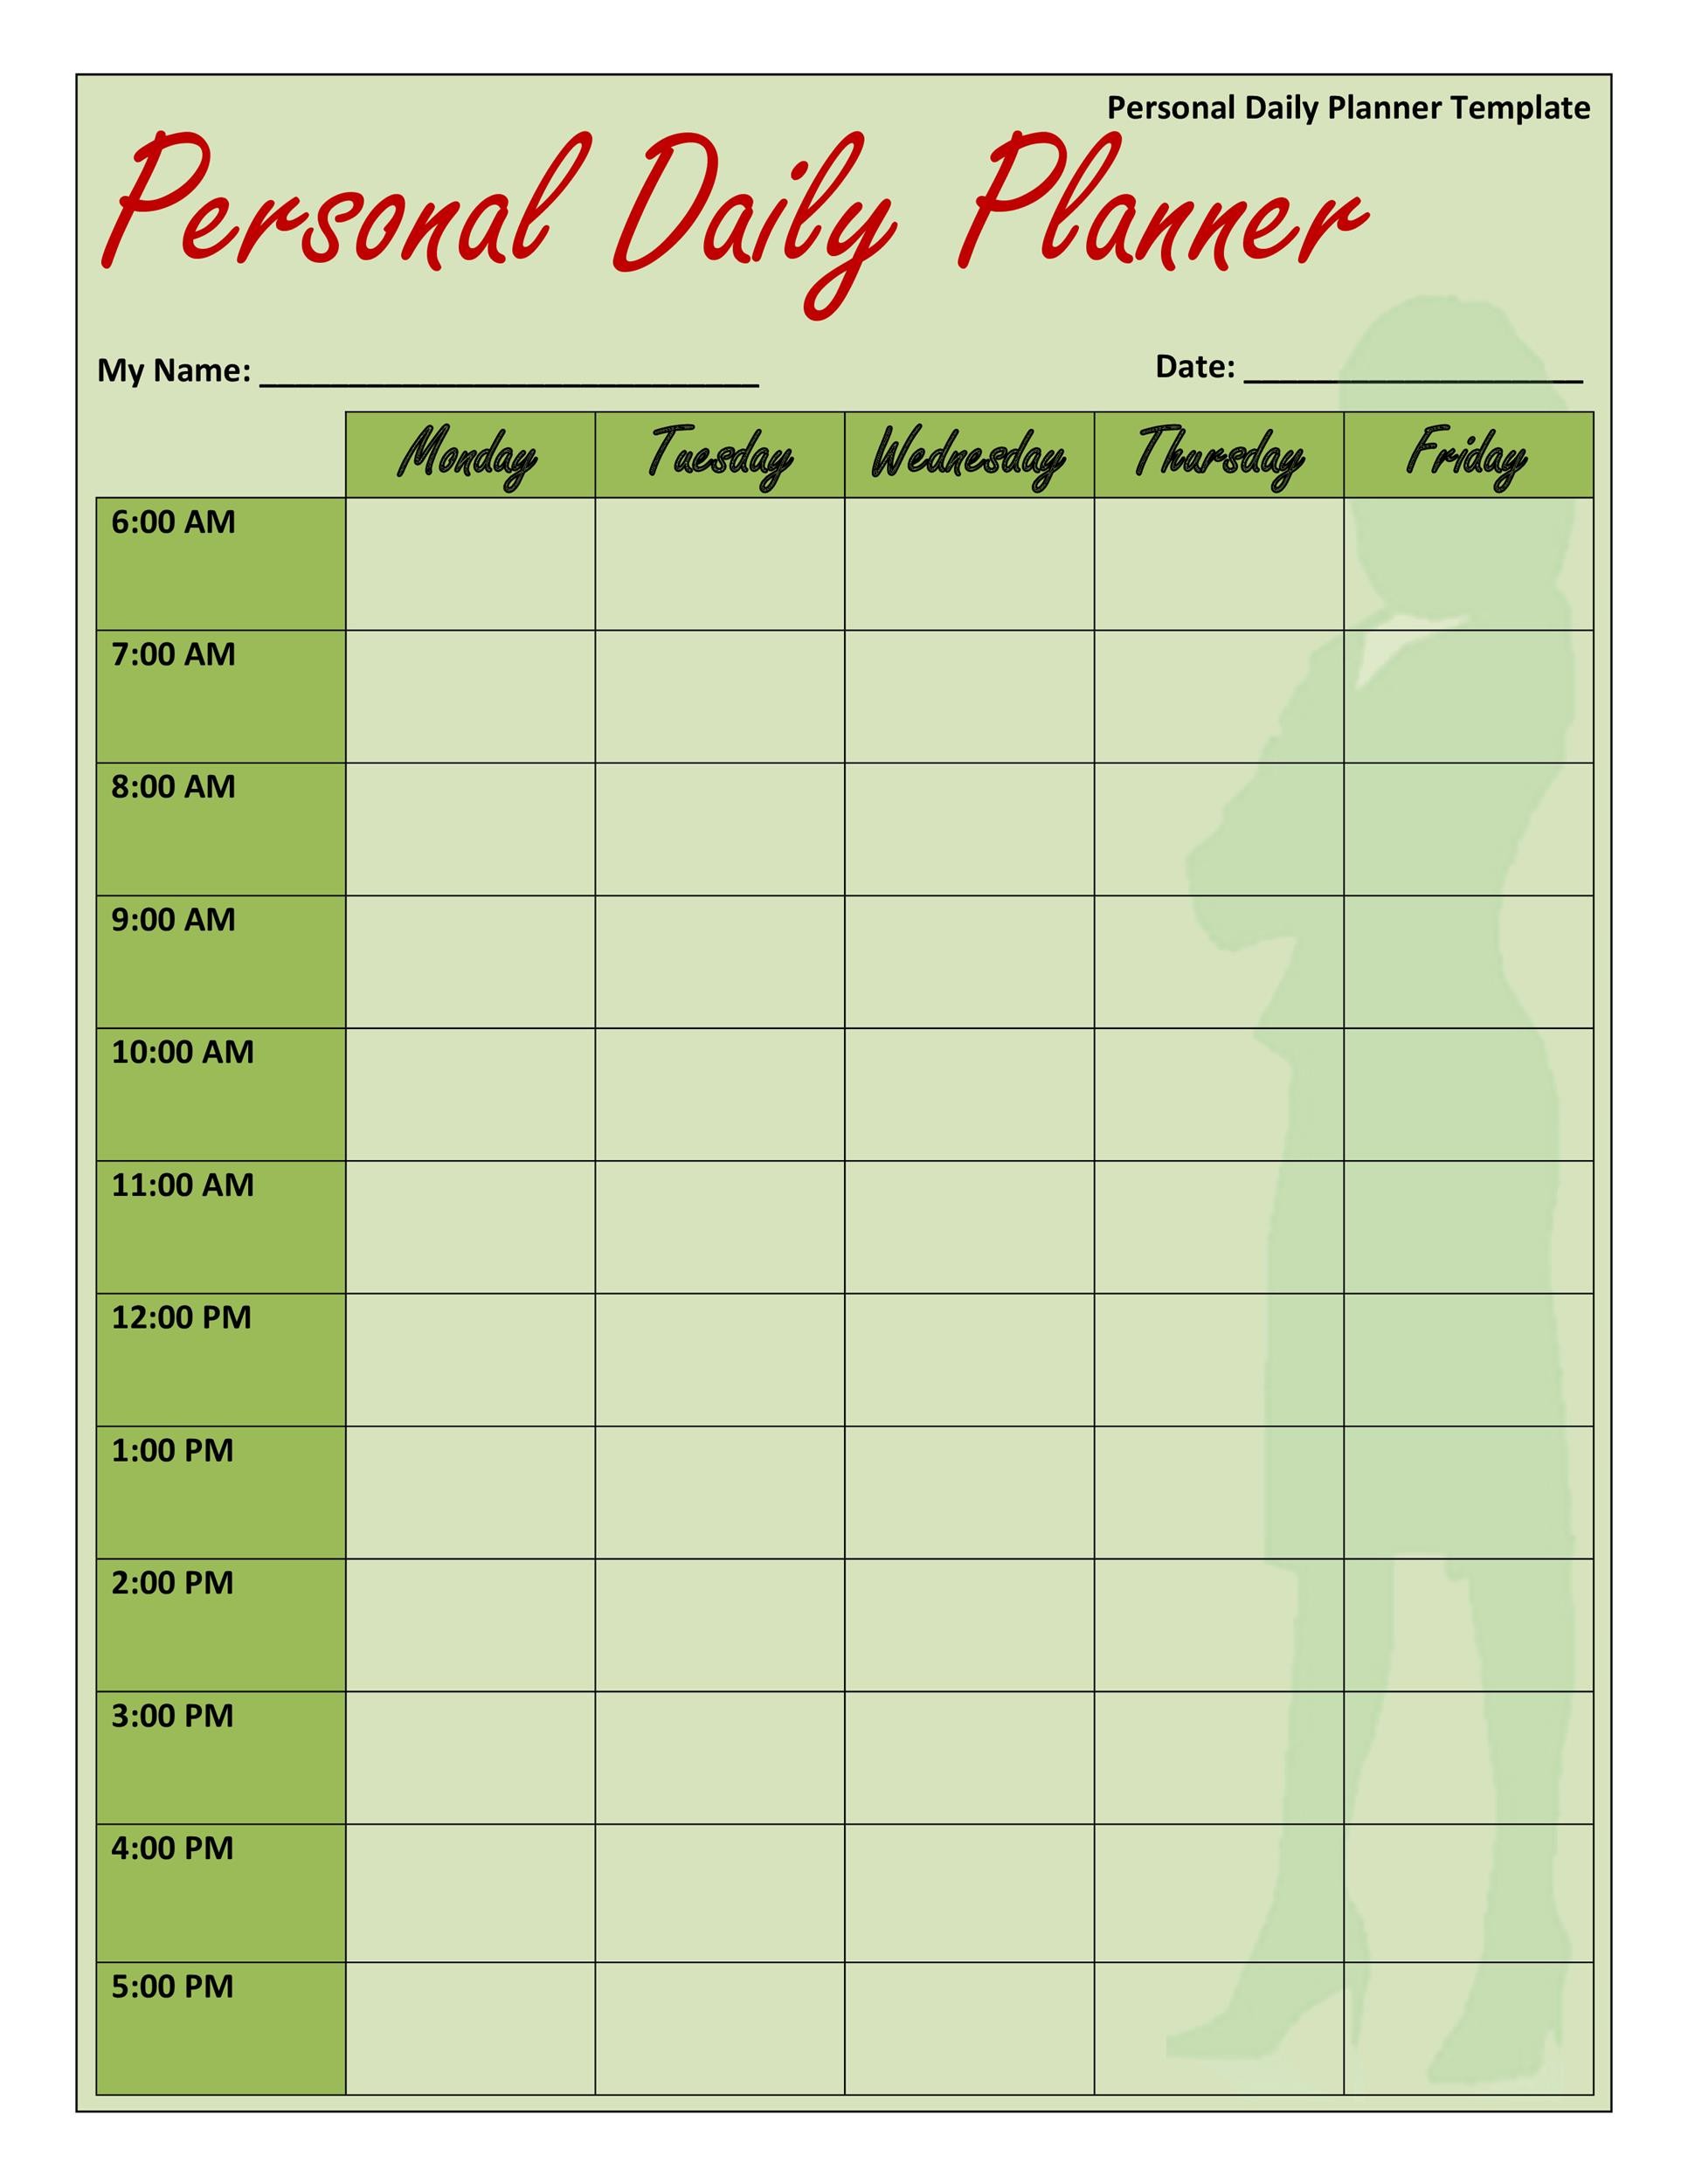 40-printable-daily-planner-templates-free-template-lab